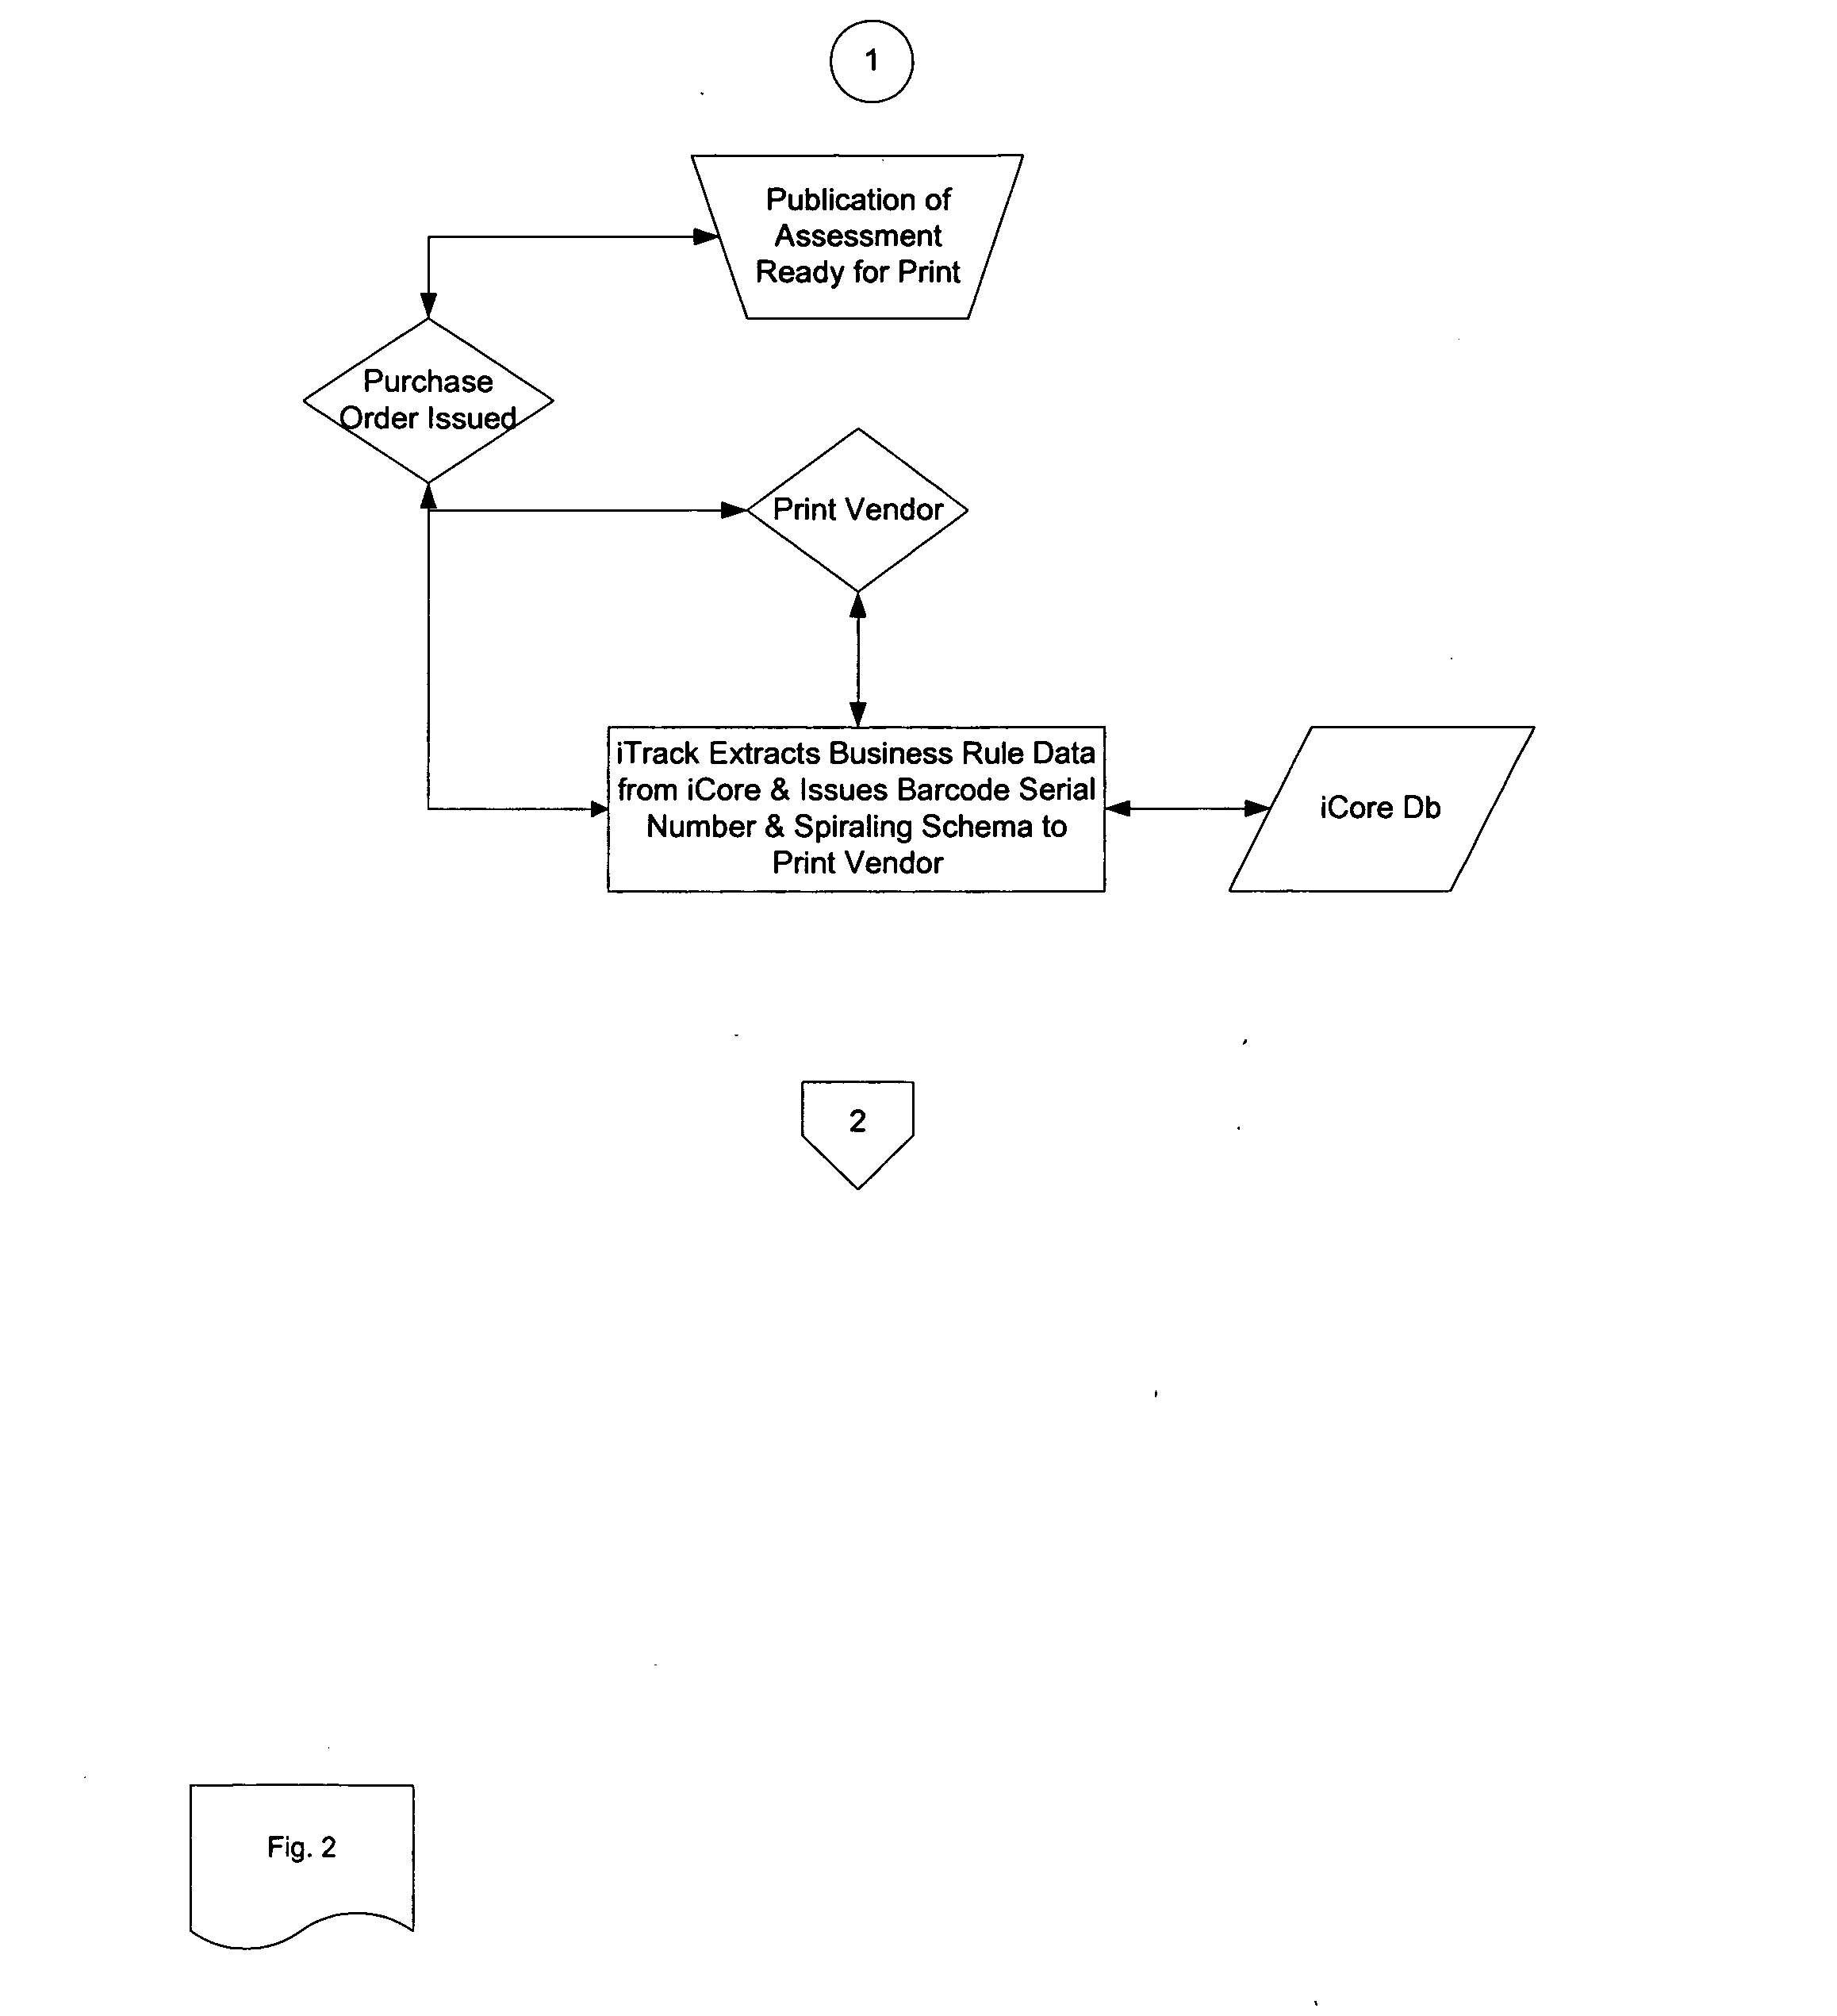 Item tracking, database management, and relational database system associated with multiple large scale test and assessment projects